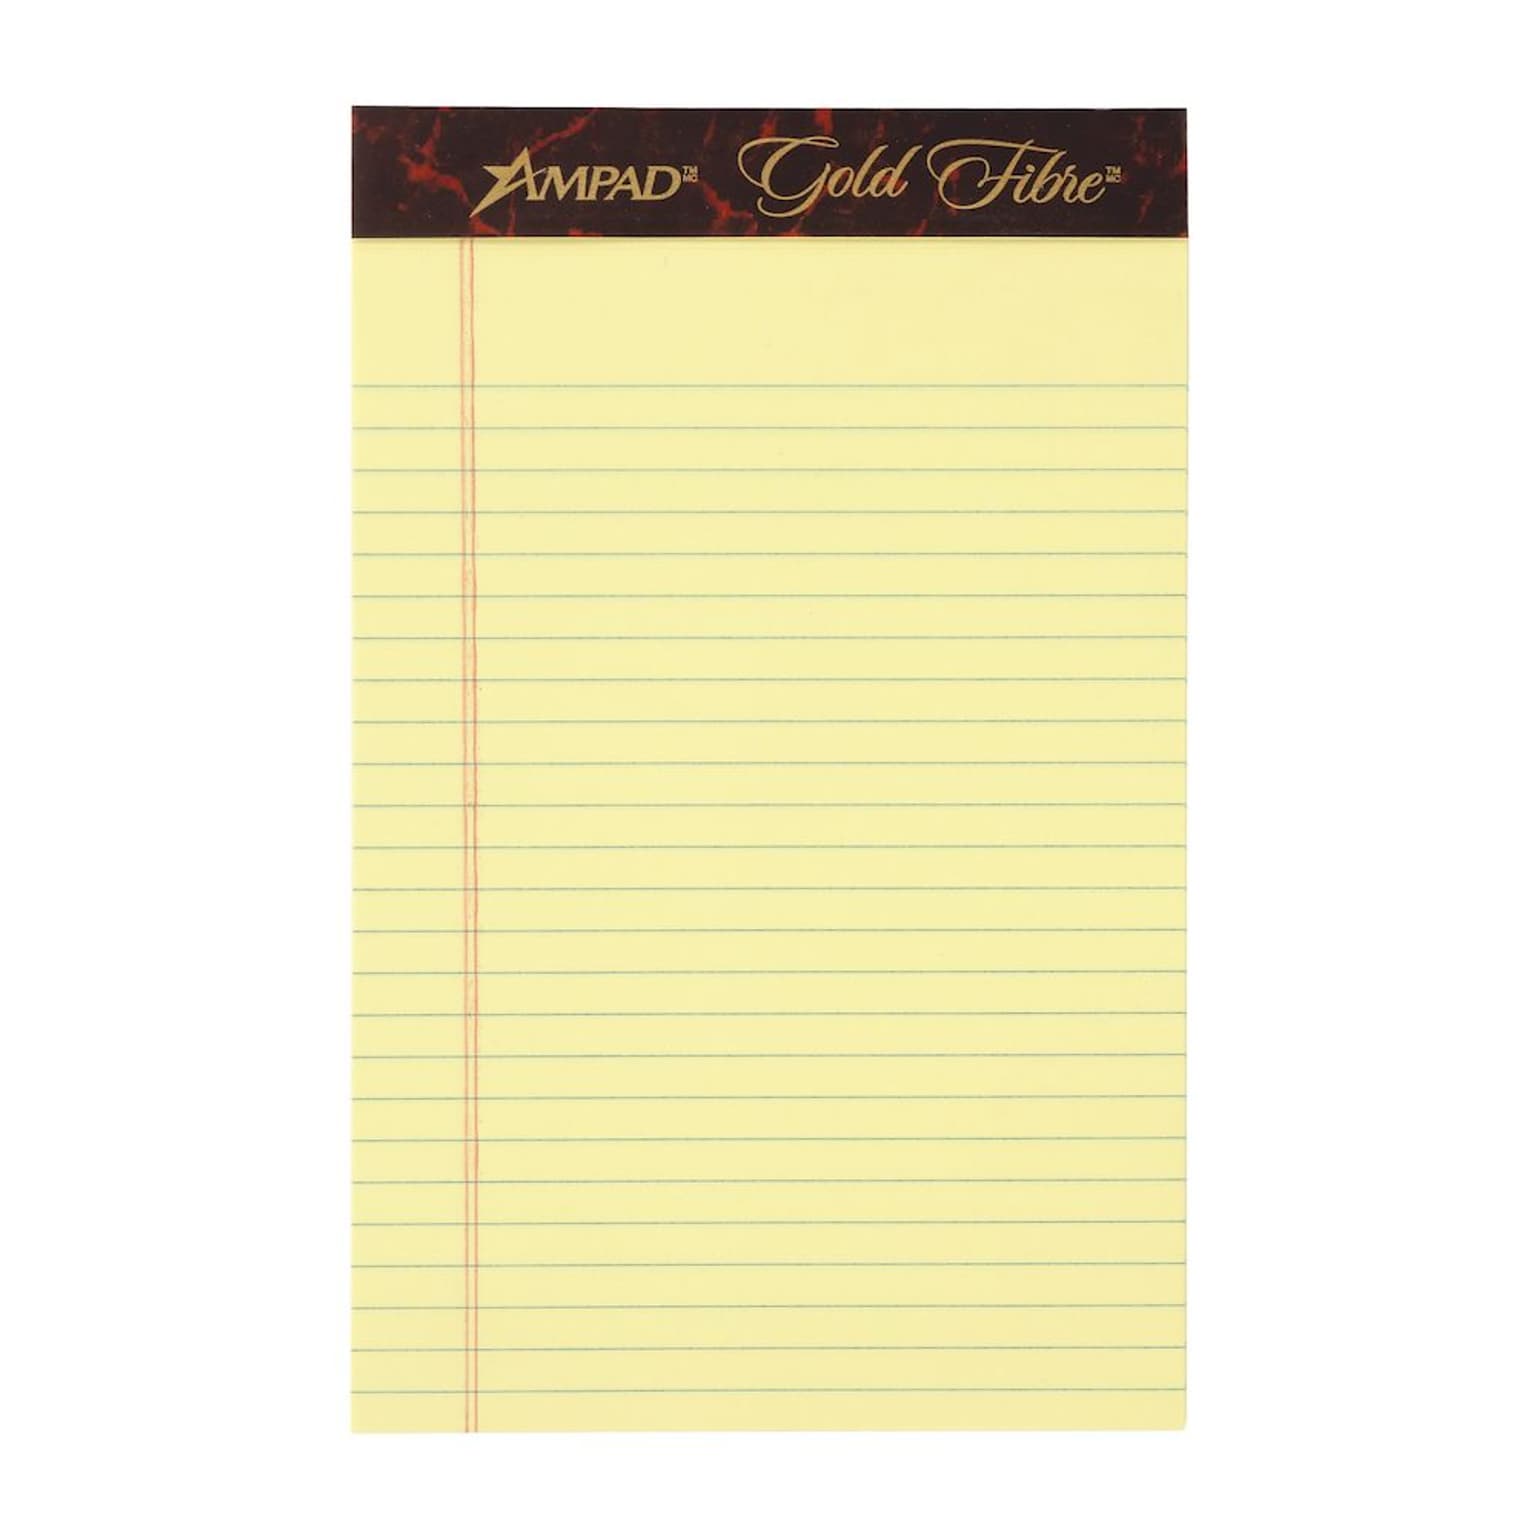 Ampad Gold Fibre Notepads, 5 x 8, College Ruled, Canary, 50 Sheets/Pad, 12 Pads/Pack (TOP 20-004R)